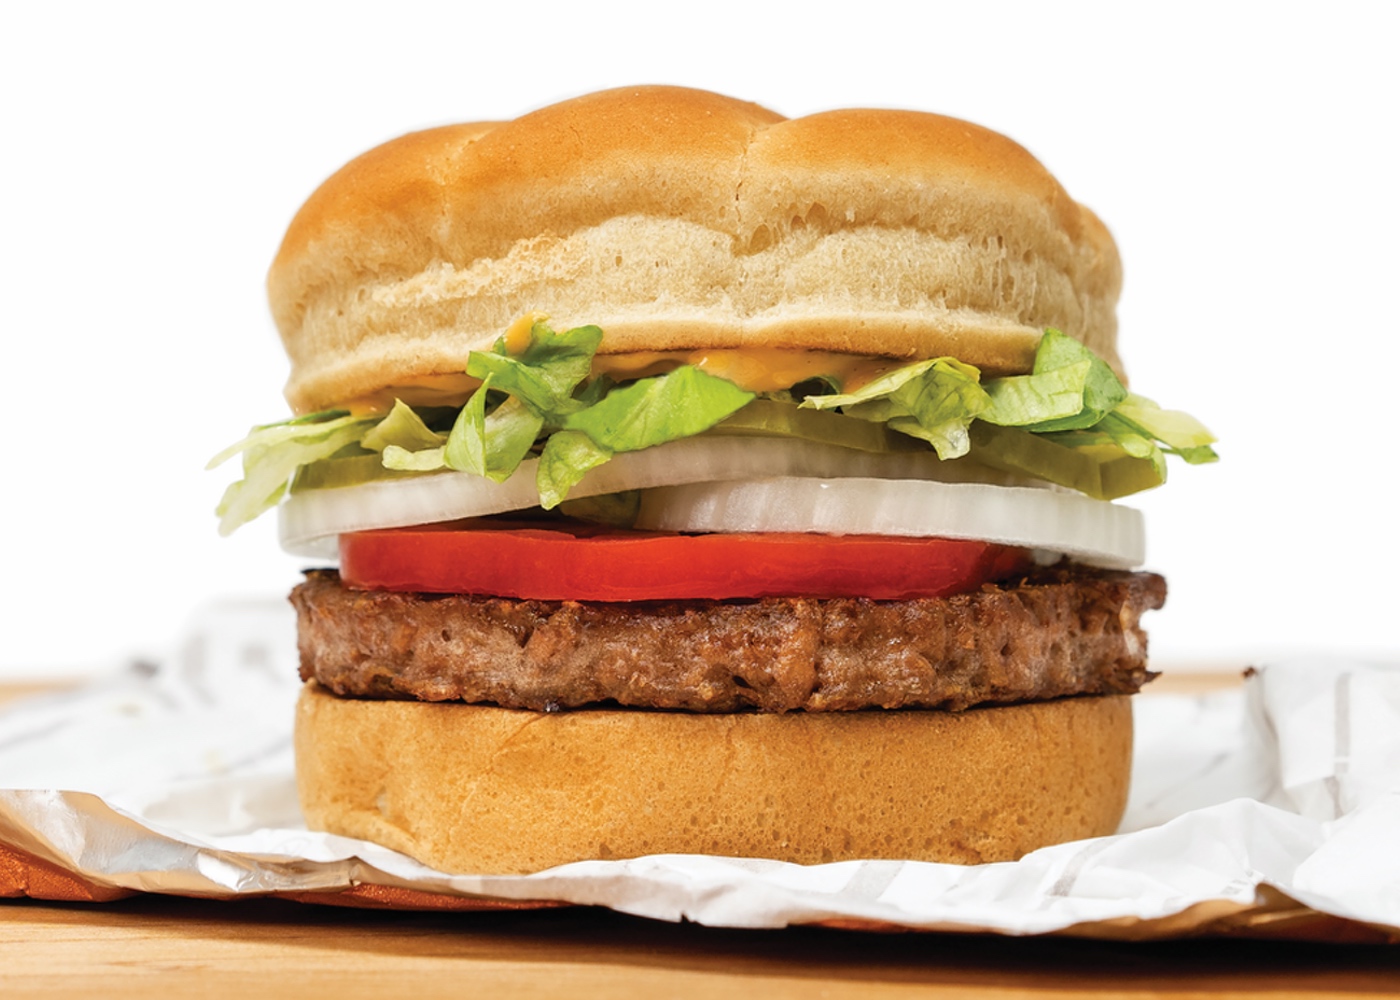 Photo of Beyond Burger sitting on wrapper.